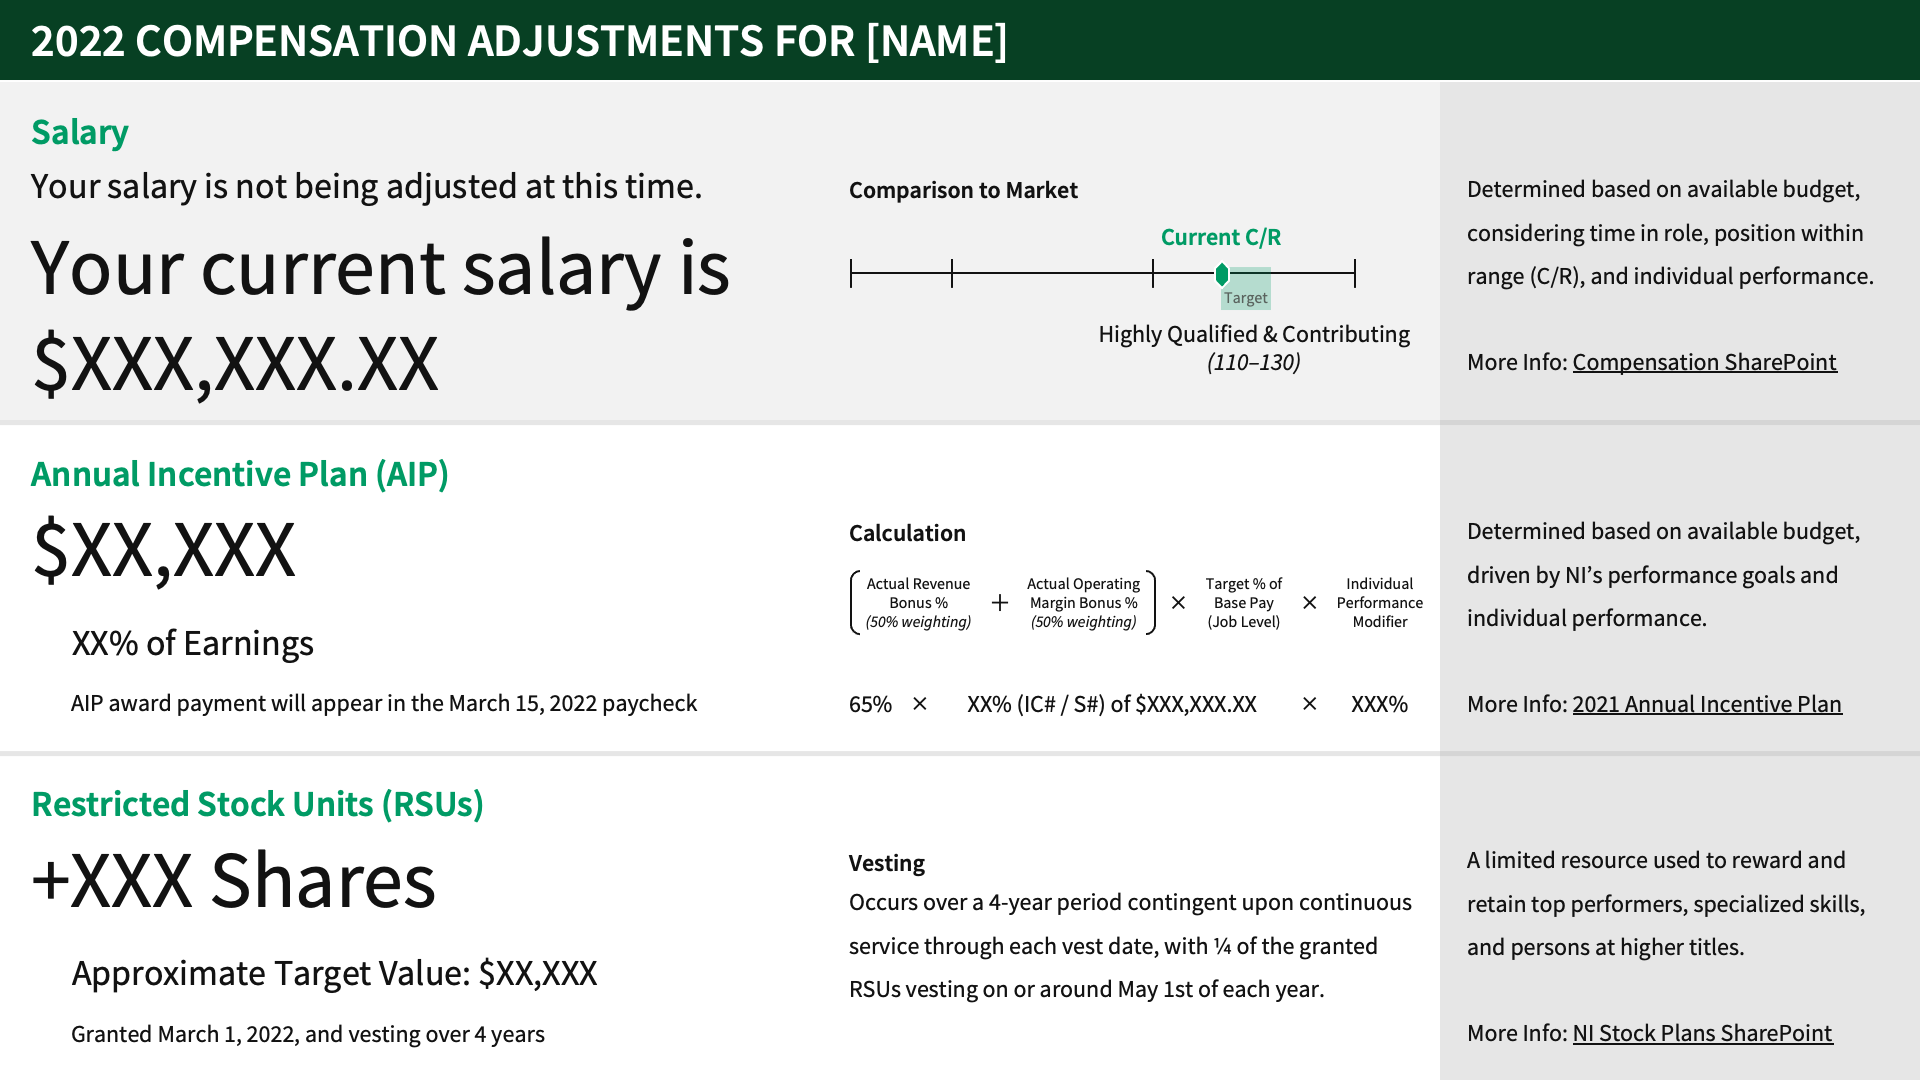 a powerpoint template with sections for salary (with a visual representation of where a person is in the salary range), annual incentive plan bonus (with the formula calculation), and restricted stock units. in this version of the template, the salary section is greyed out and states that salary is not being adjusted at this time, with the current salary shown